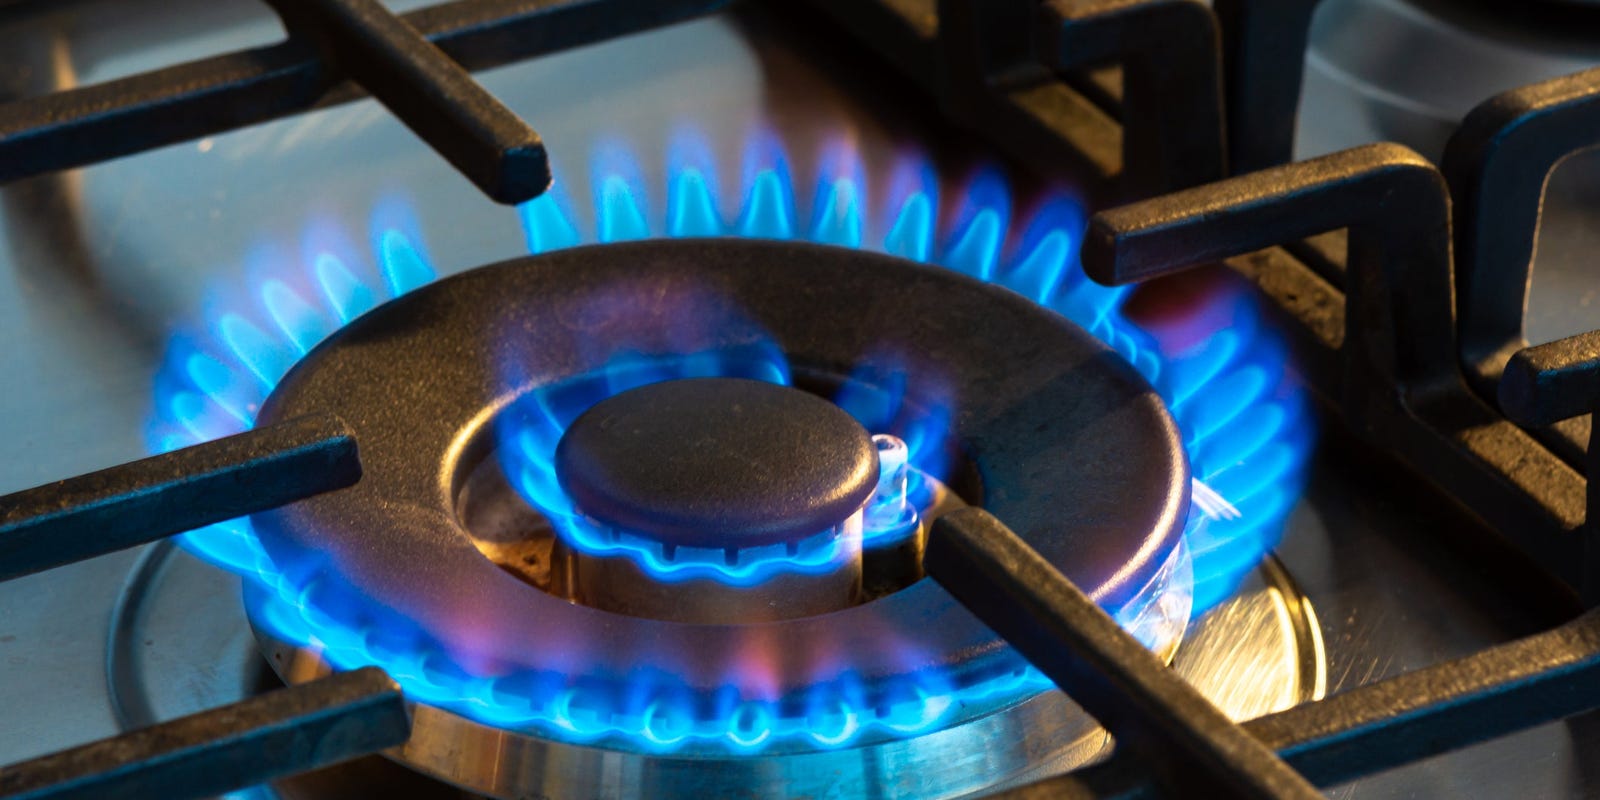 Federal agency is considering a ban on gas stoves in the US, report says: 'Hidden hazard'